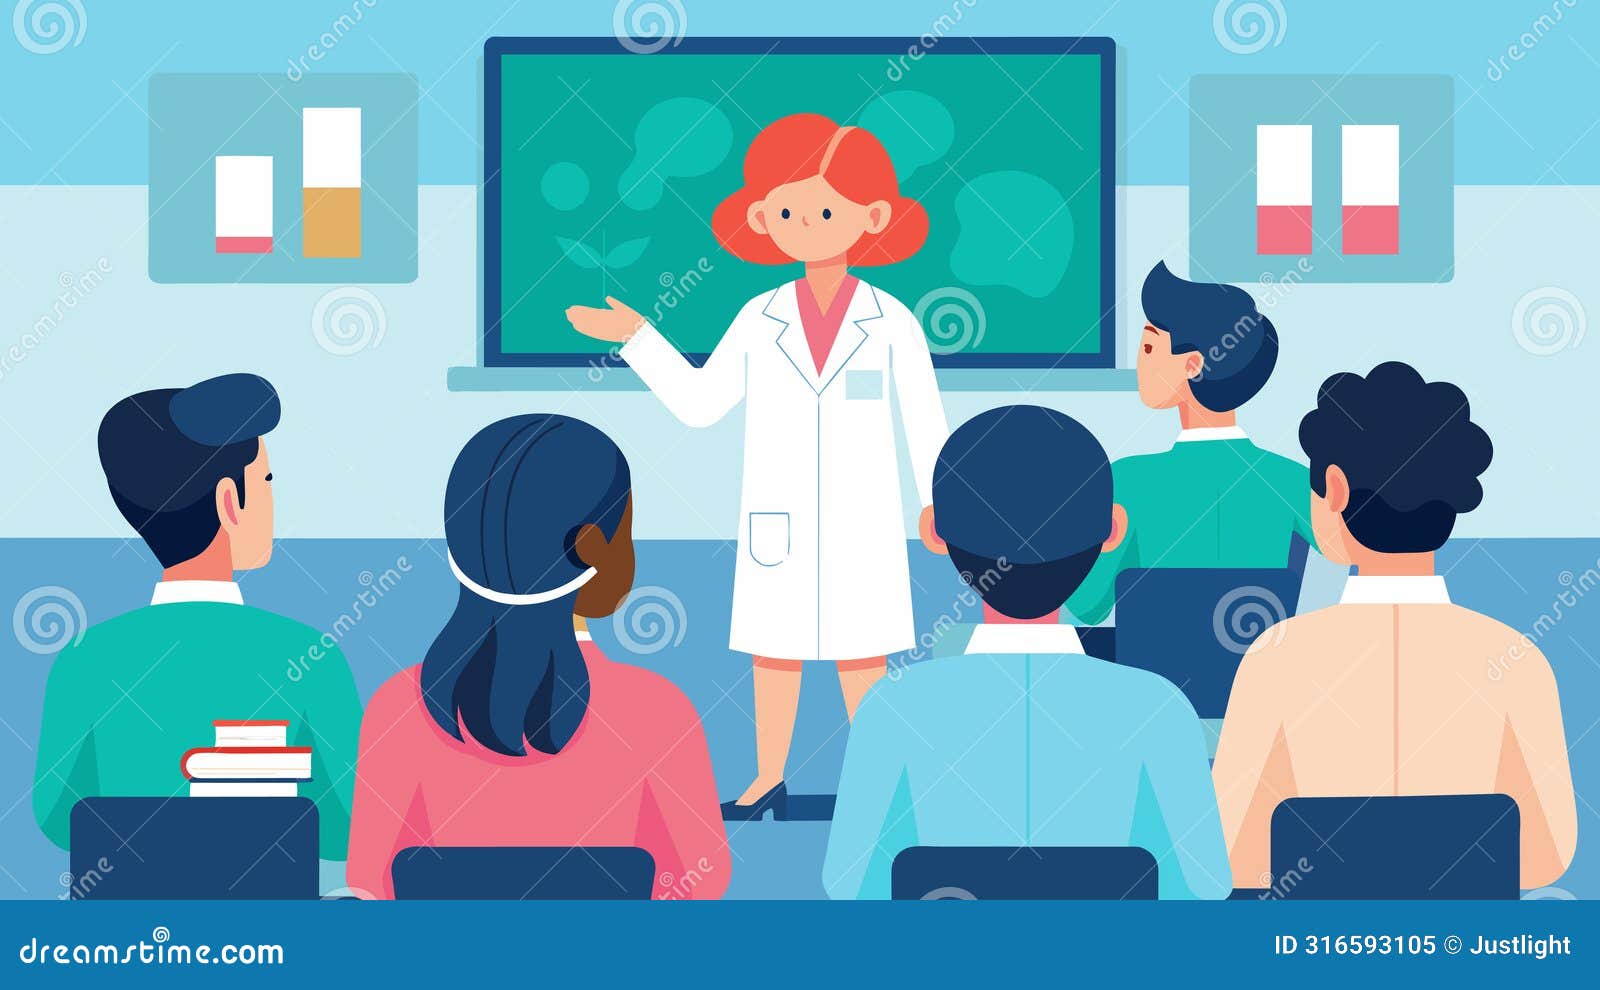 in a classroom setting medical staff attend a lecture on common myths and misunderstandings surrounding neurodiversity